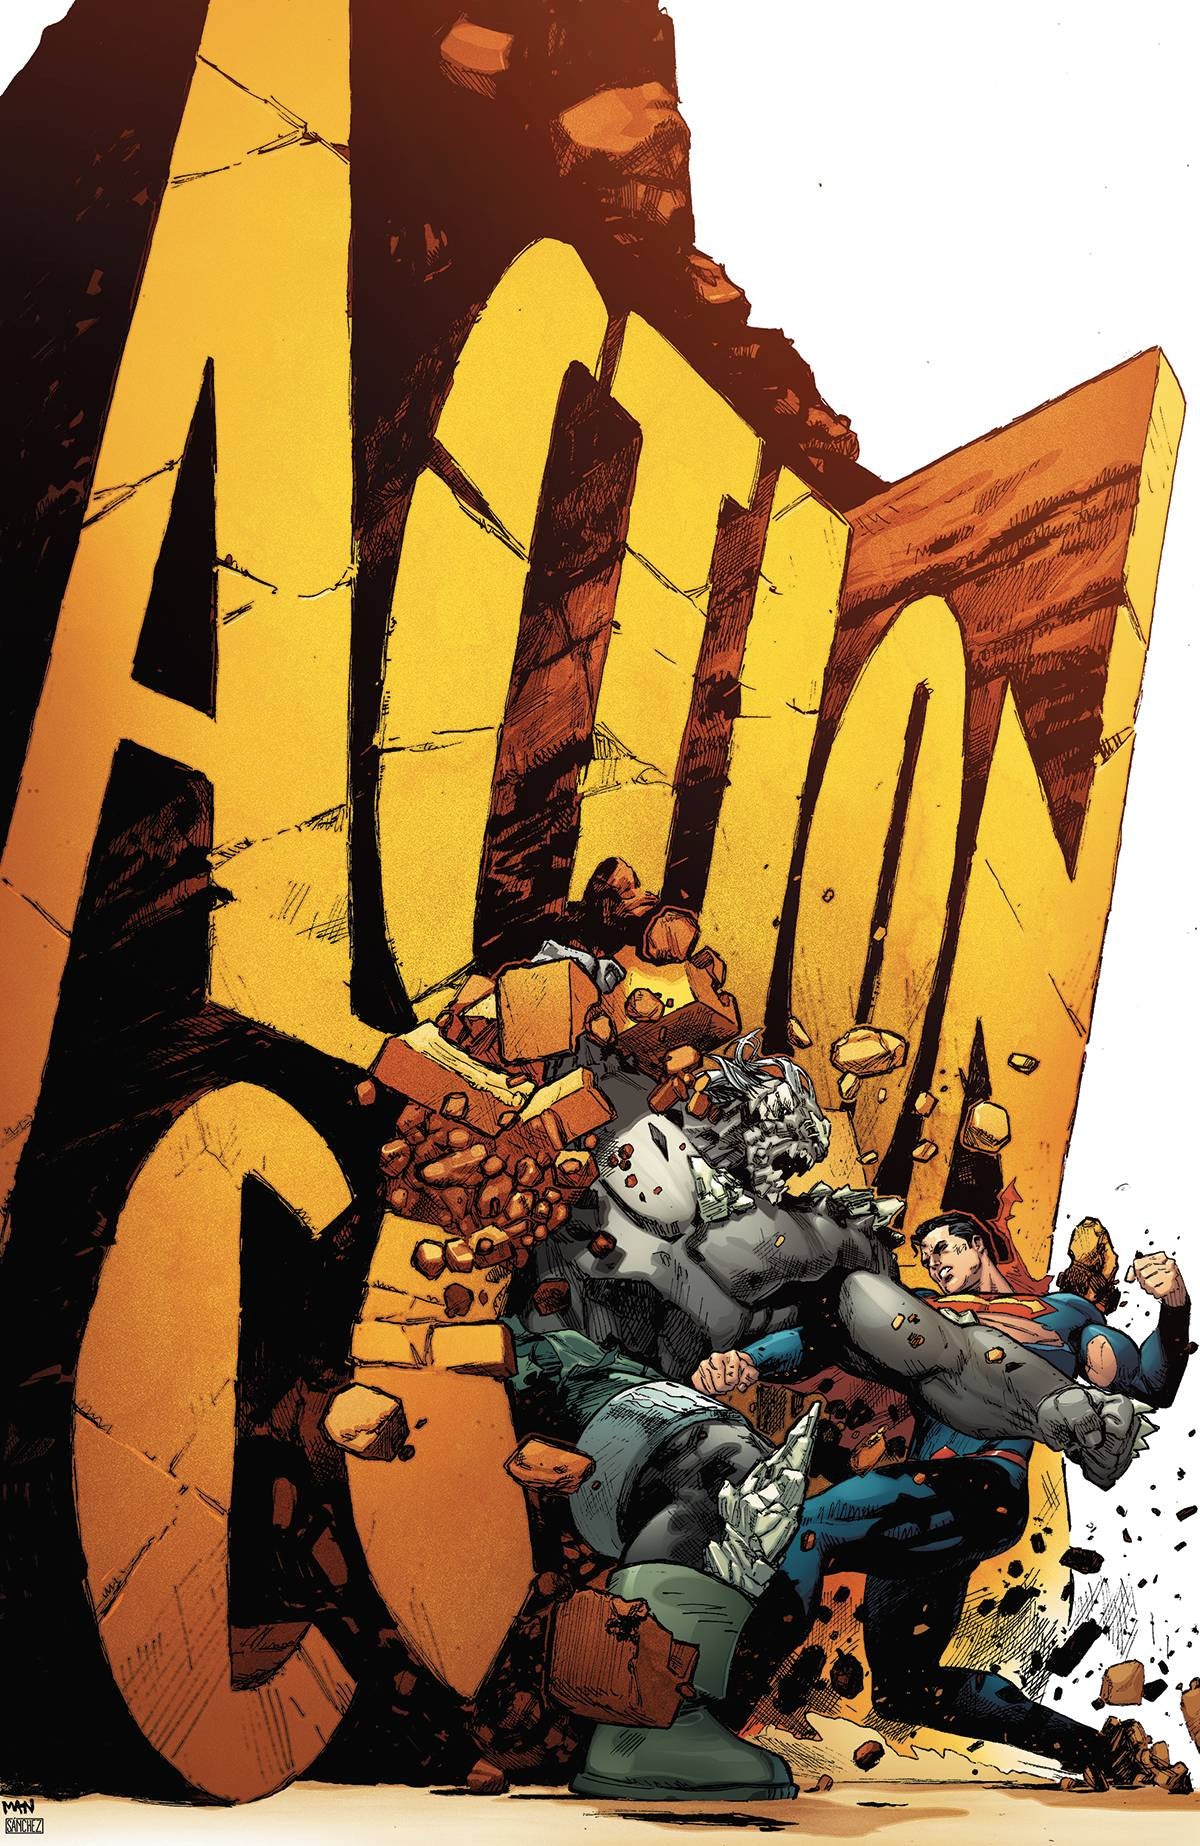 ACTION COMICS #962 COVER